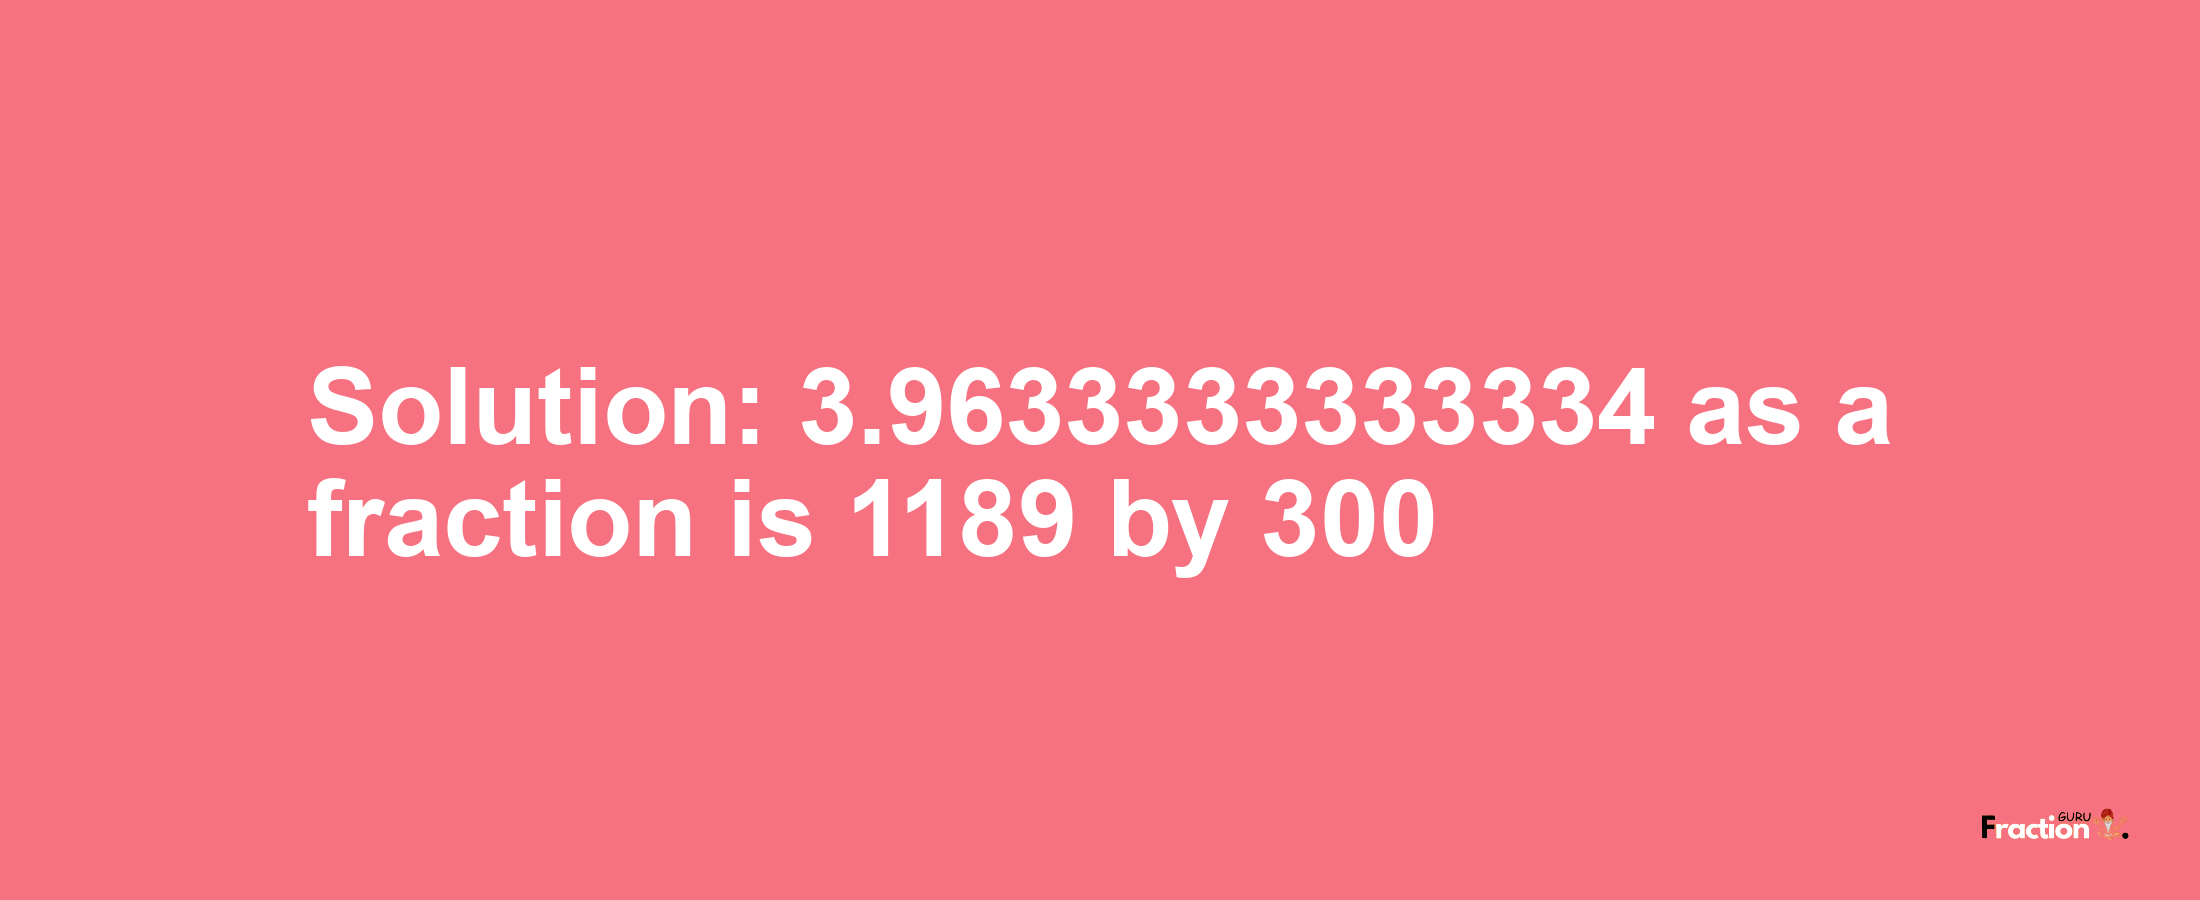 Solution:3.9633333333334 as a fraction is 1189/300